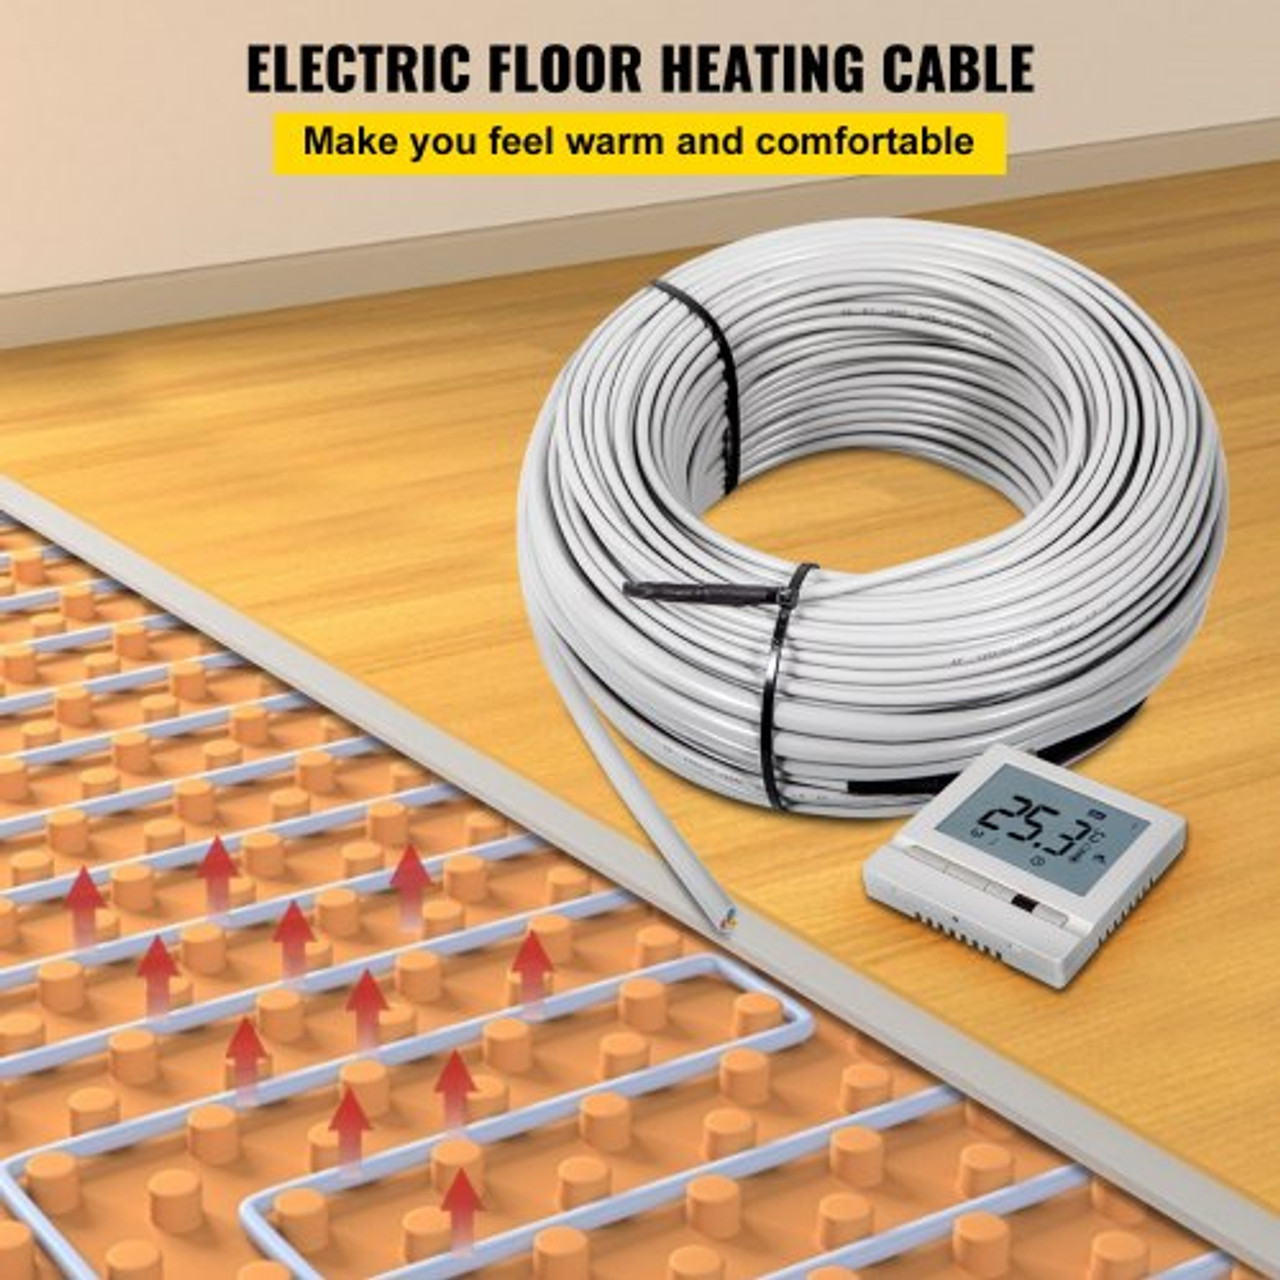 Ditra Floor Heating Cable,135W 120V Floor Tile Heat Cable,35.3 FT Long,10.7 sqft,with Convenient Temperature Control Panel,No Noise or Radiation